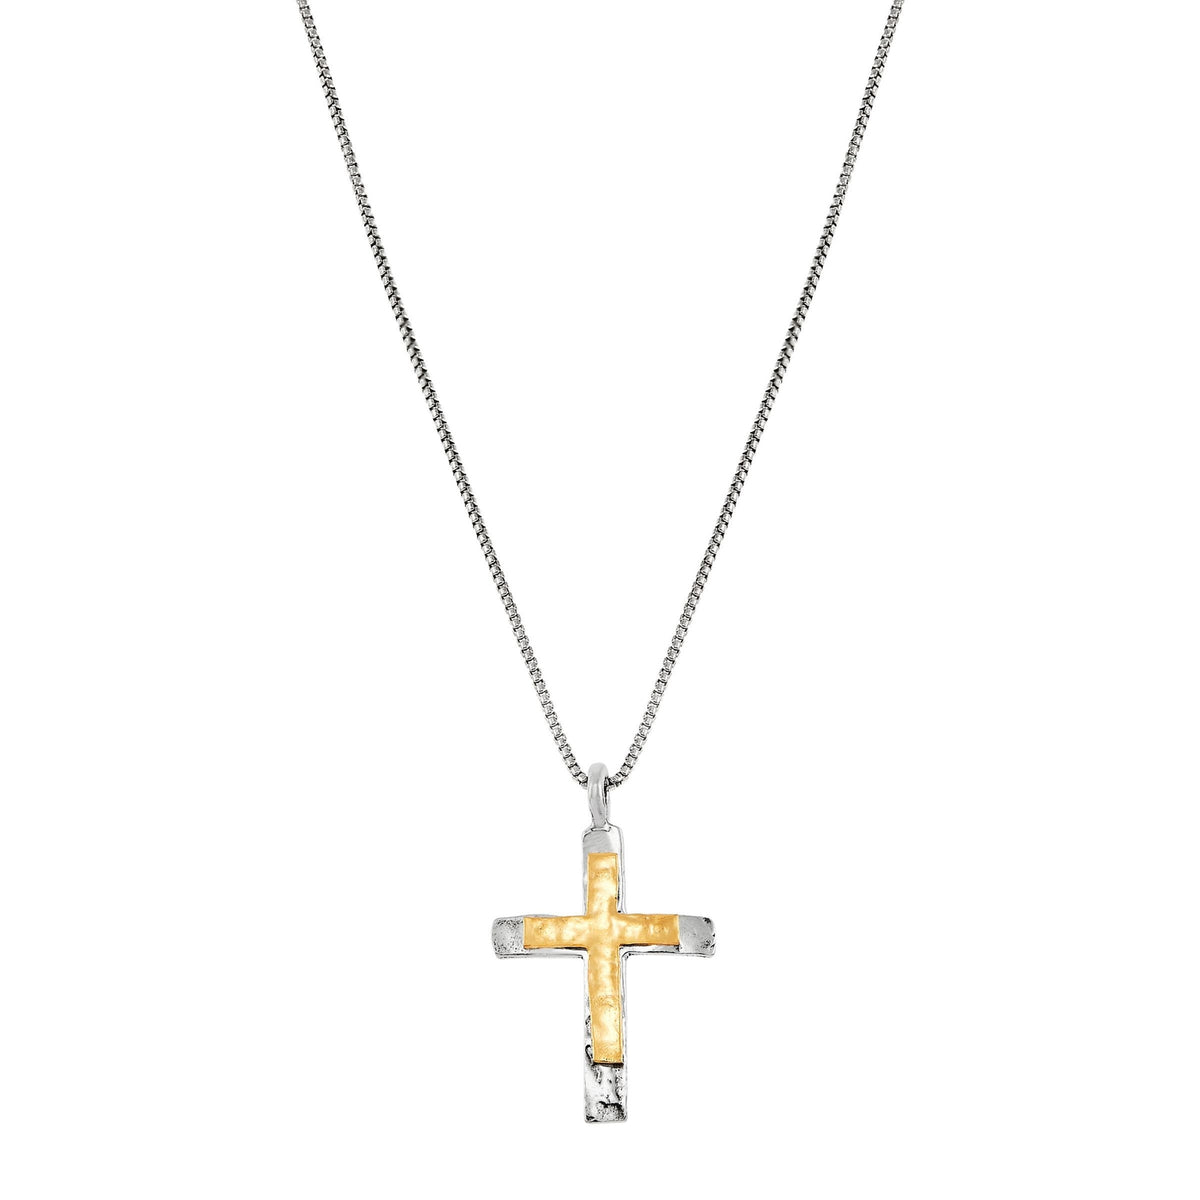 Silpada 'Melded Cross' Necklace Pendant in 14K Gold Plated